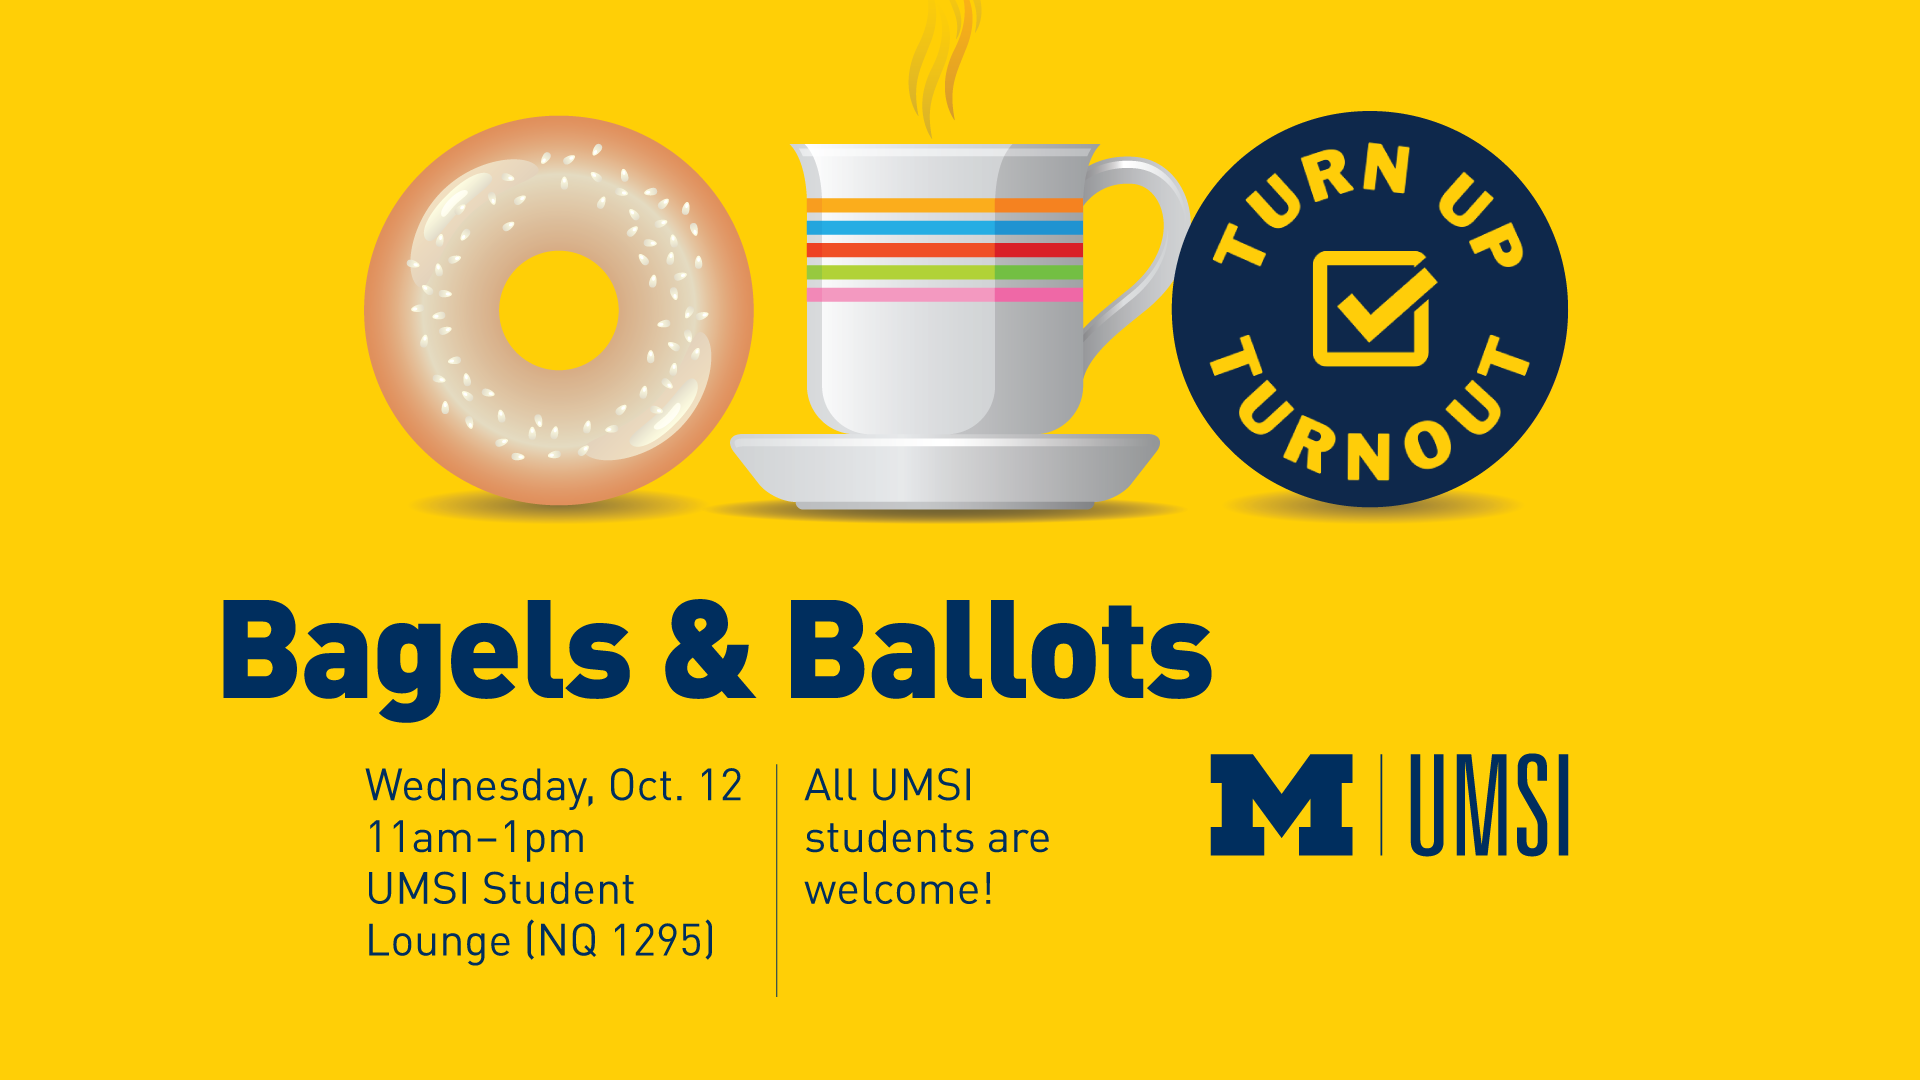 “Bagels & Ballots. Wednesday, Oct. 12. 11 a.m. - 1 p.m. UMSI Student Lounge (NQ 1295). All UMSI students are welcome!” Clip art of a bagel and a steaming mug next to a  logo of a checked box that reads, “Turn Up Turnout.” 